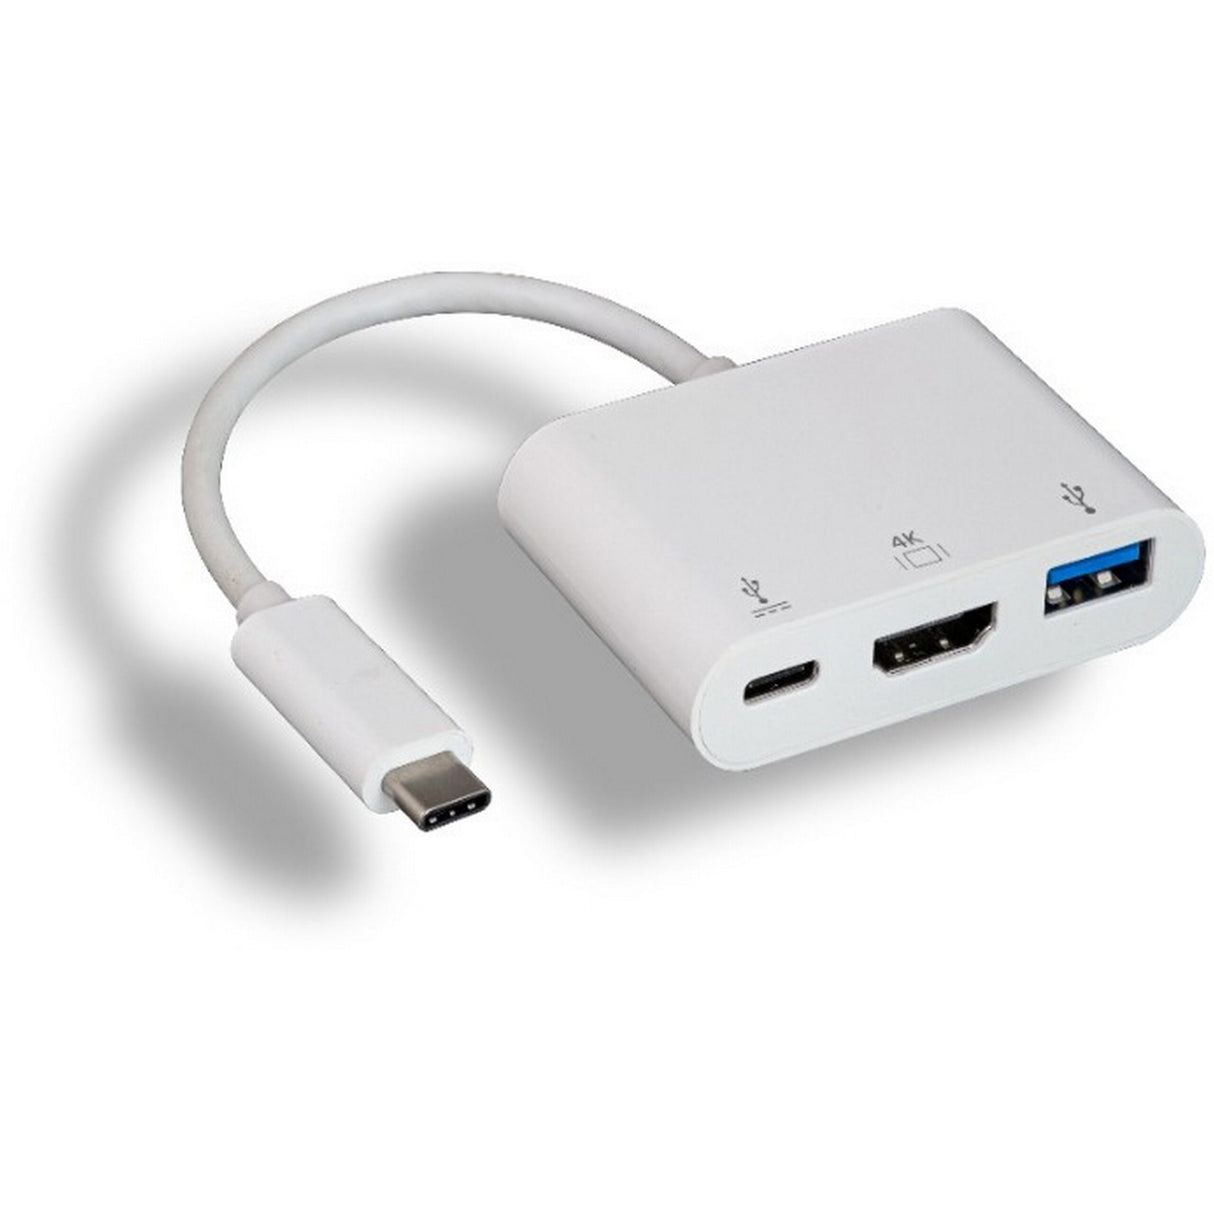 Connectronics CHMU3C USB 3.1 Type C Male to HDMI Female Adapter